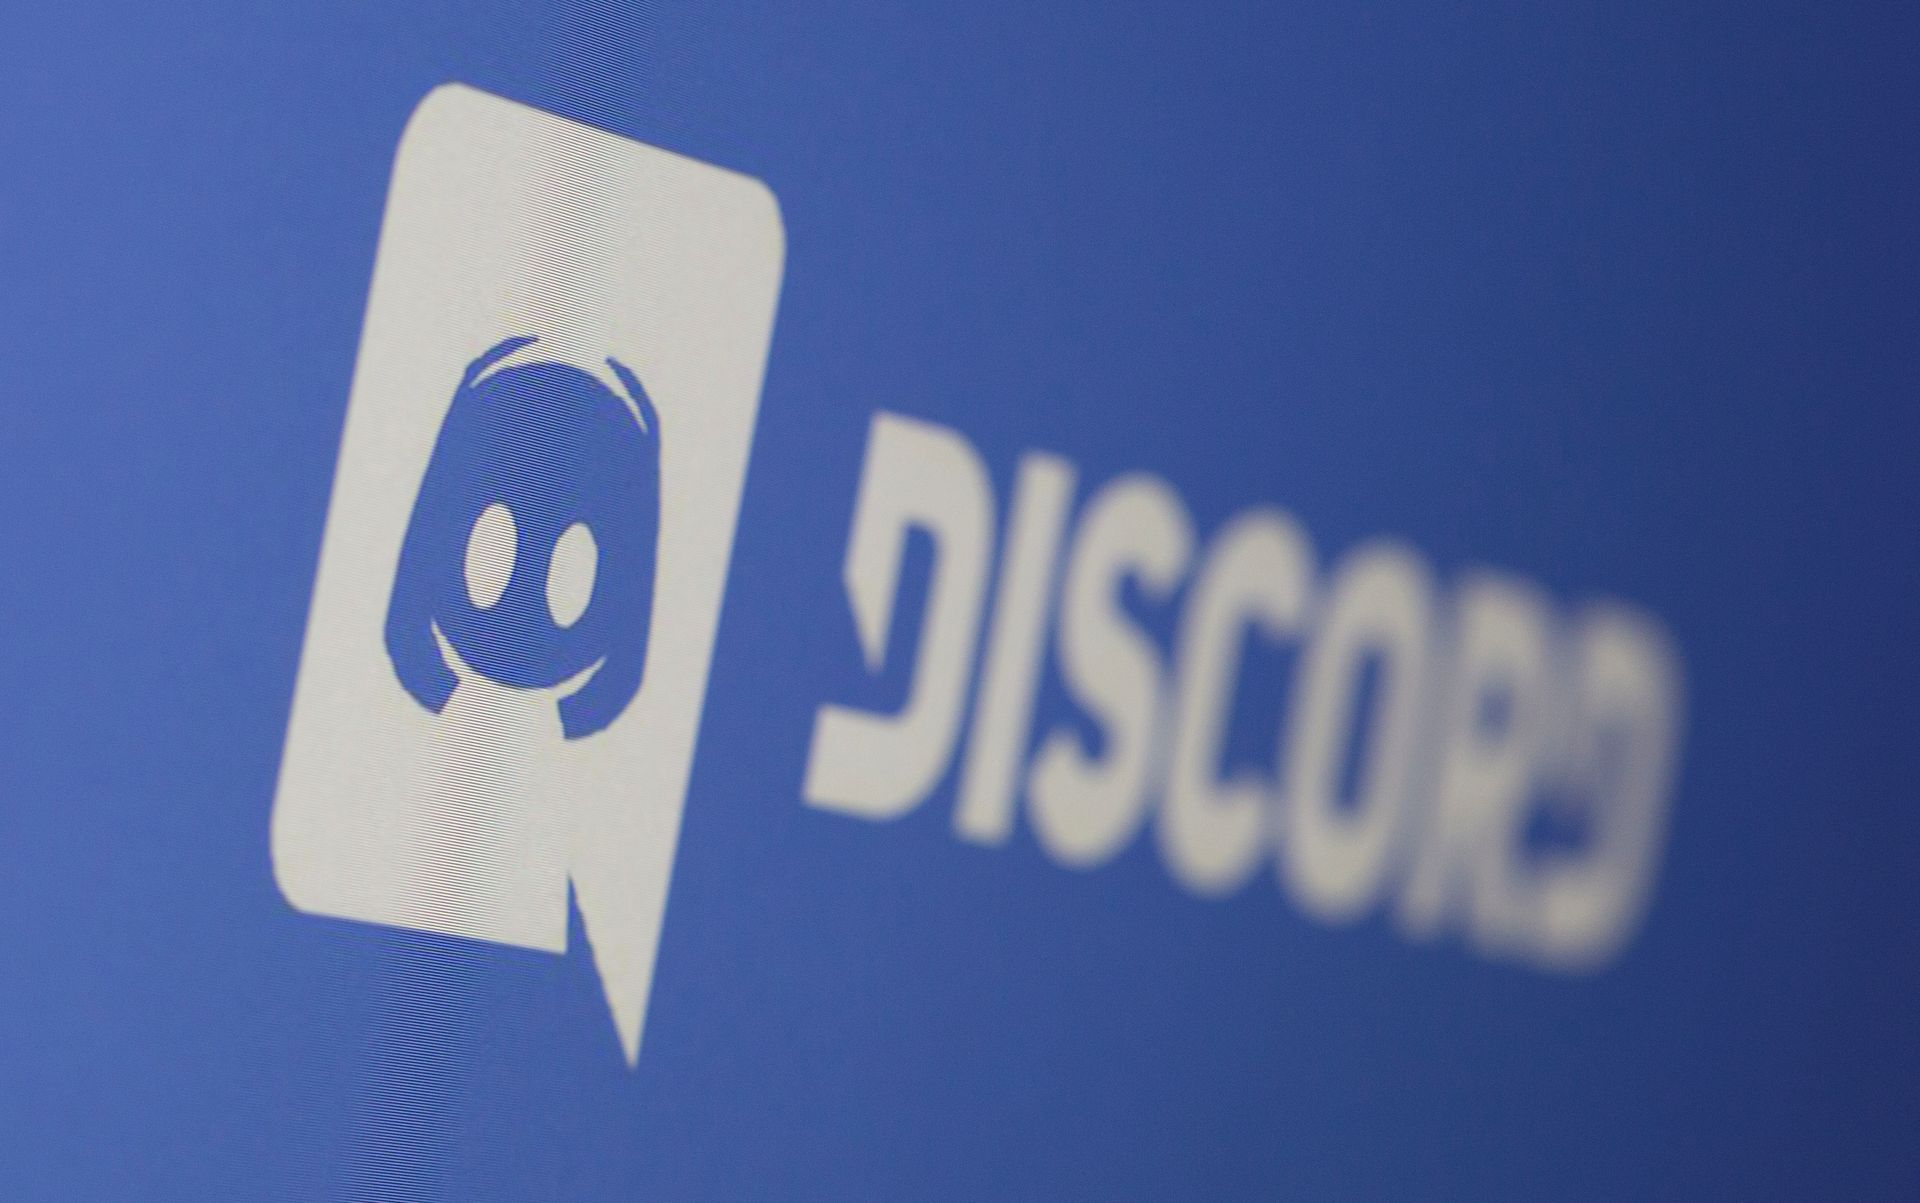 Better Discord not working 2022: How to fix it?